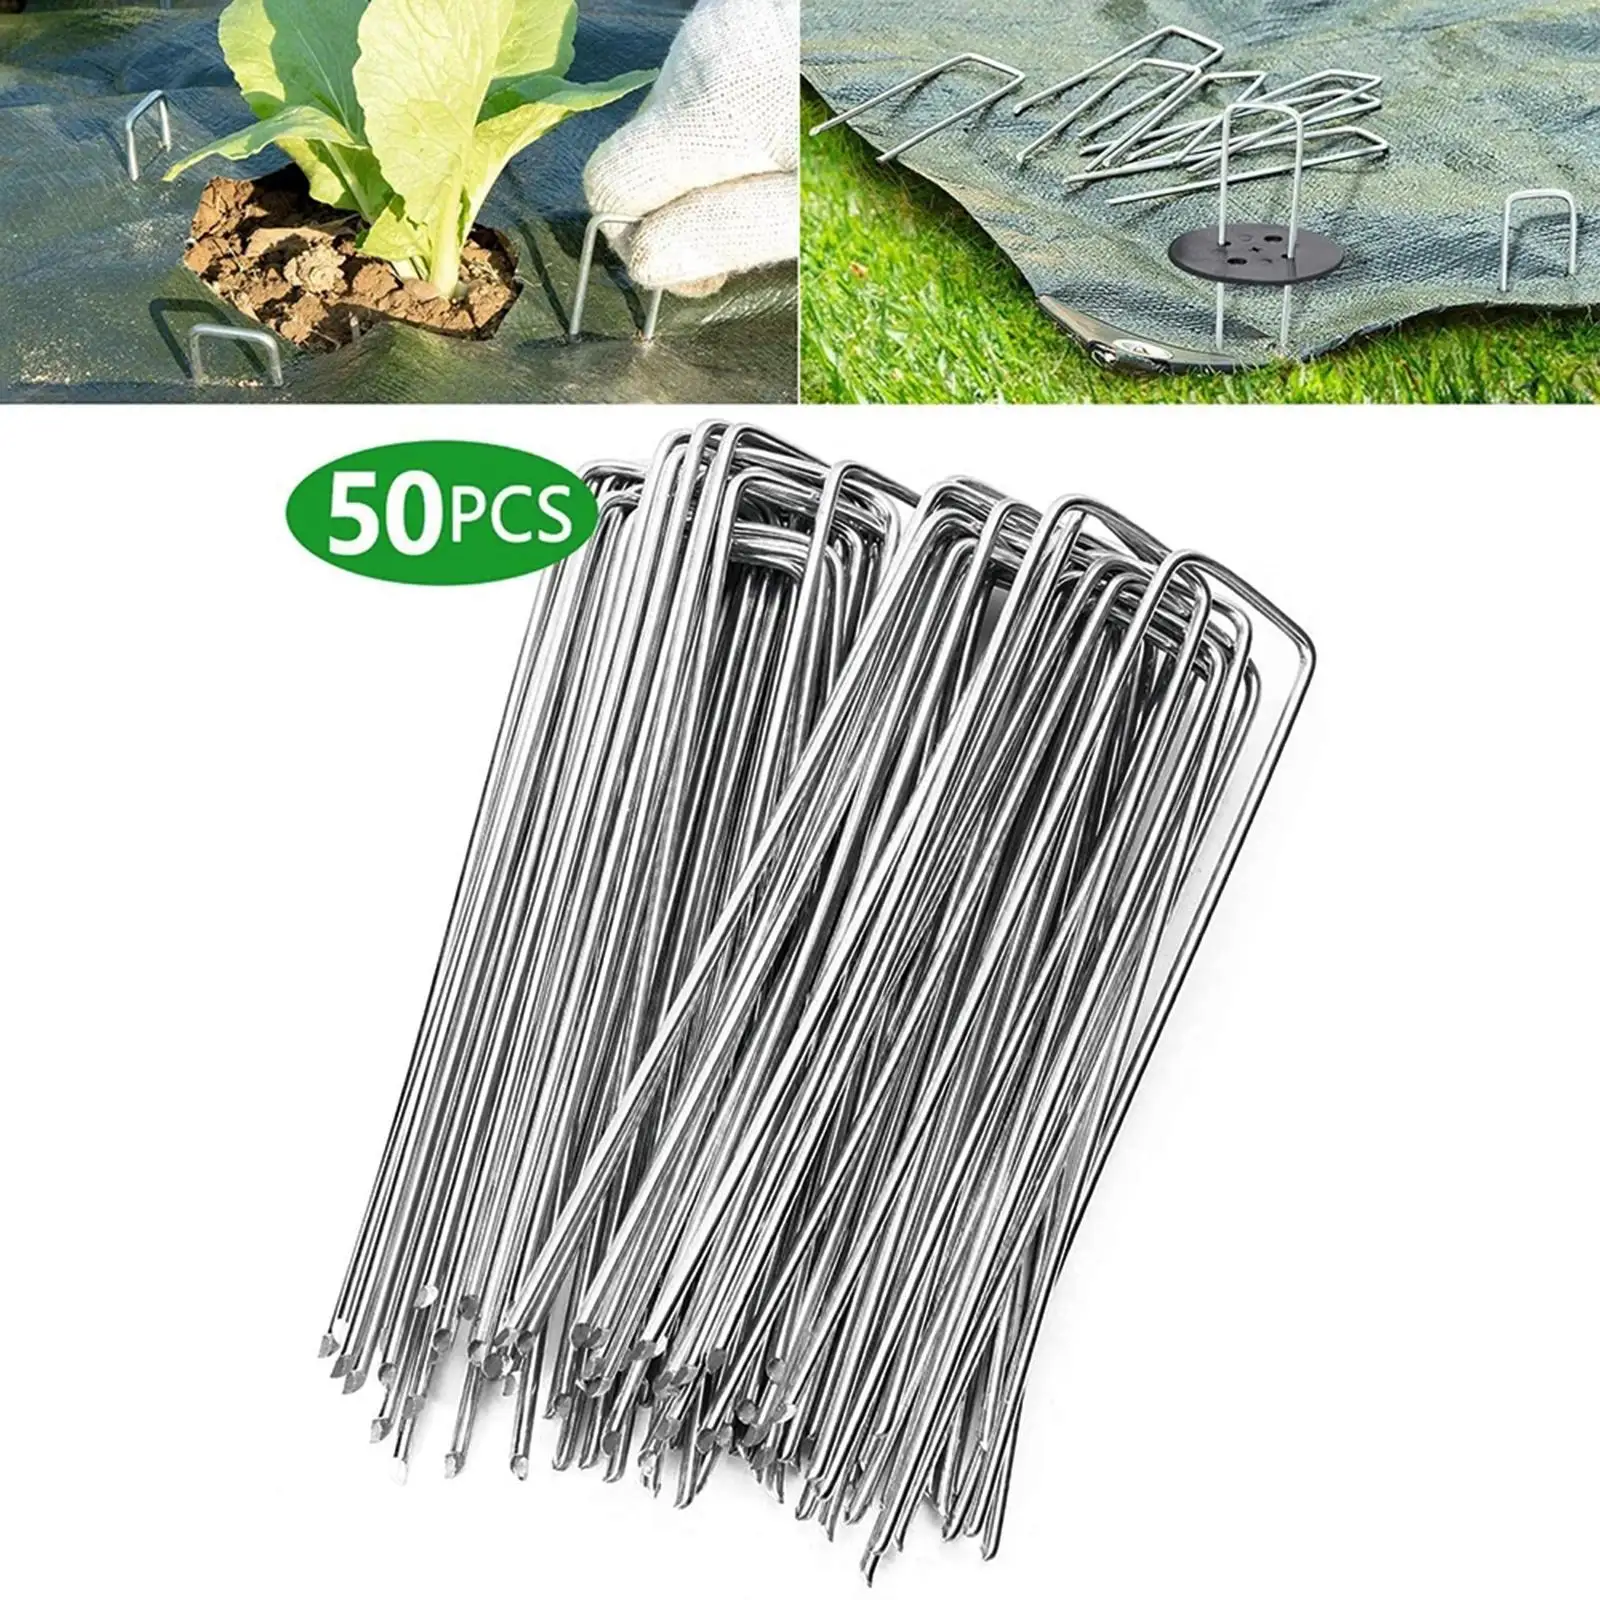 50x Landscape Staples SOD Staples Stakes Anchor Pegs Fabric Pins 11 Gauge